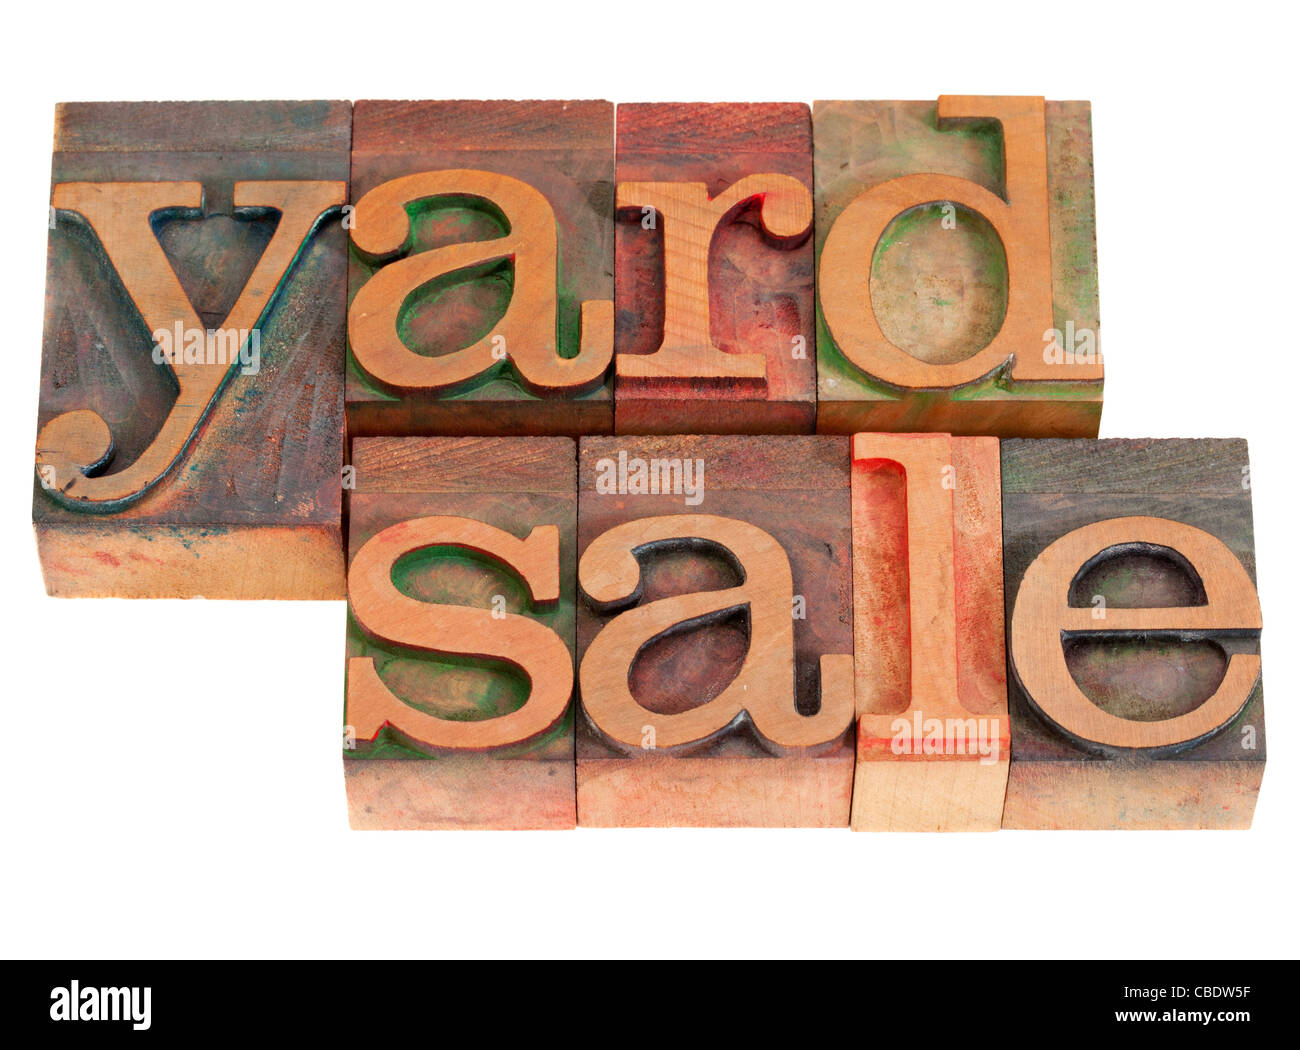 yard sale words in vintage wood letterpress printing blocks, stained by color inks, isolated on white Stock Photo